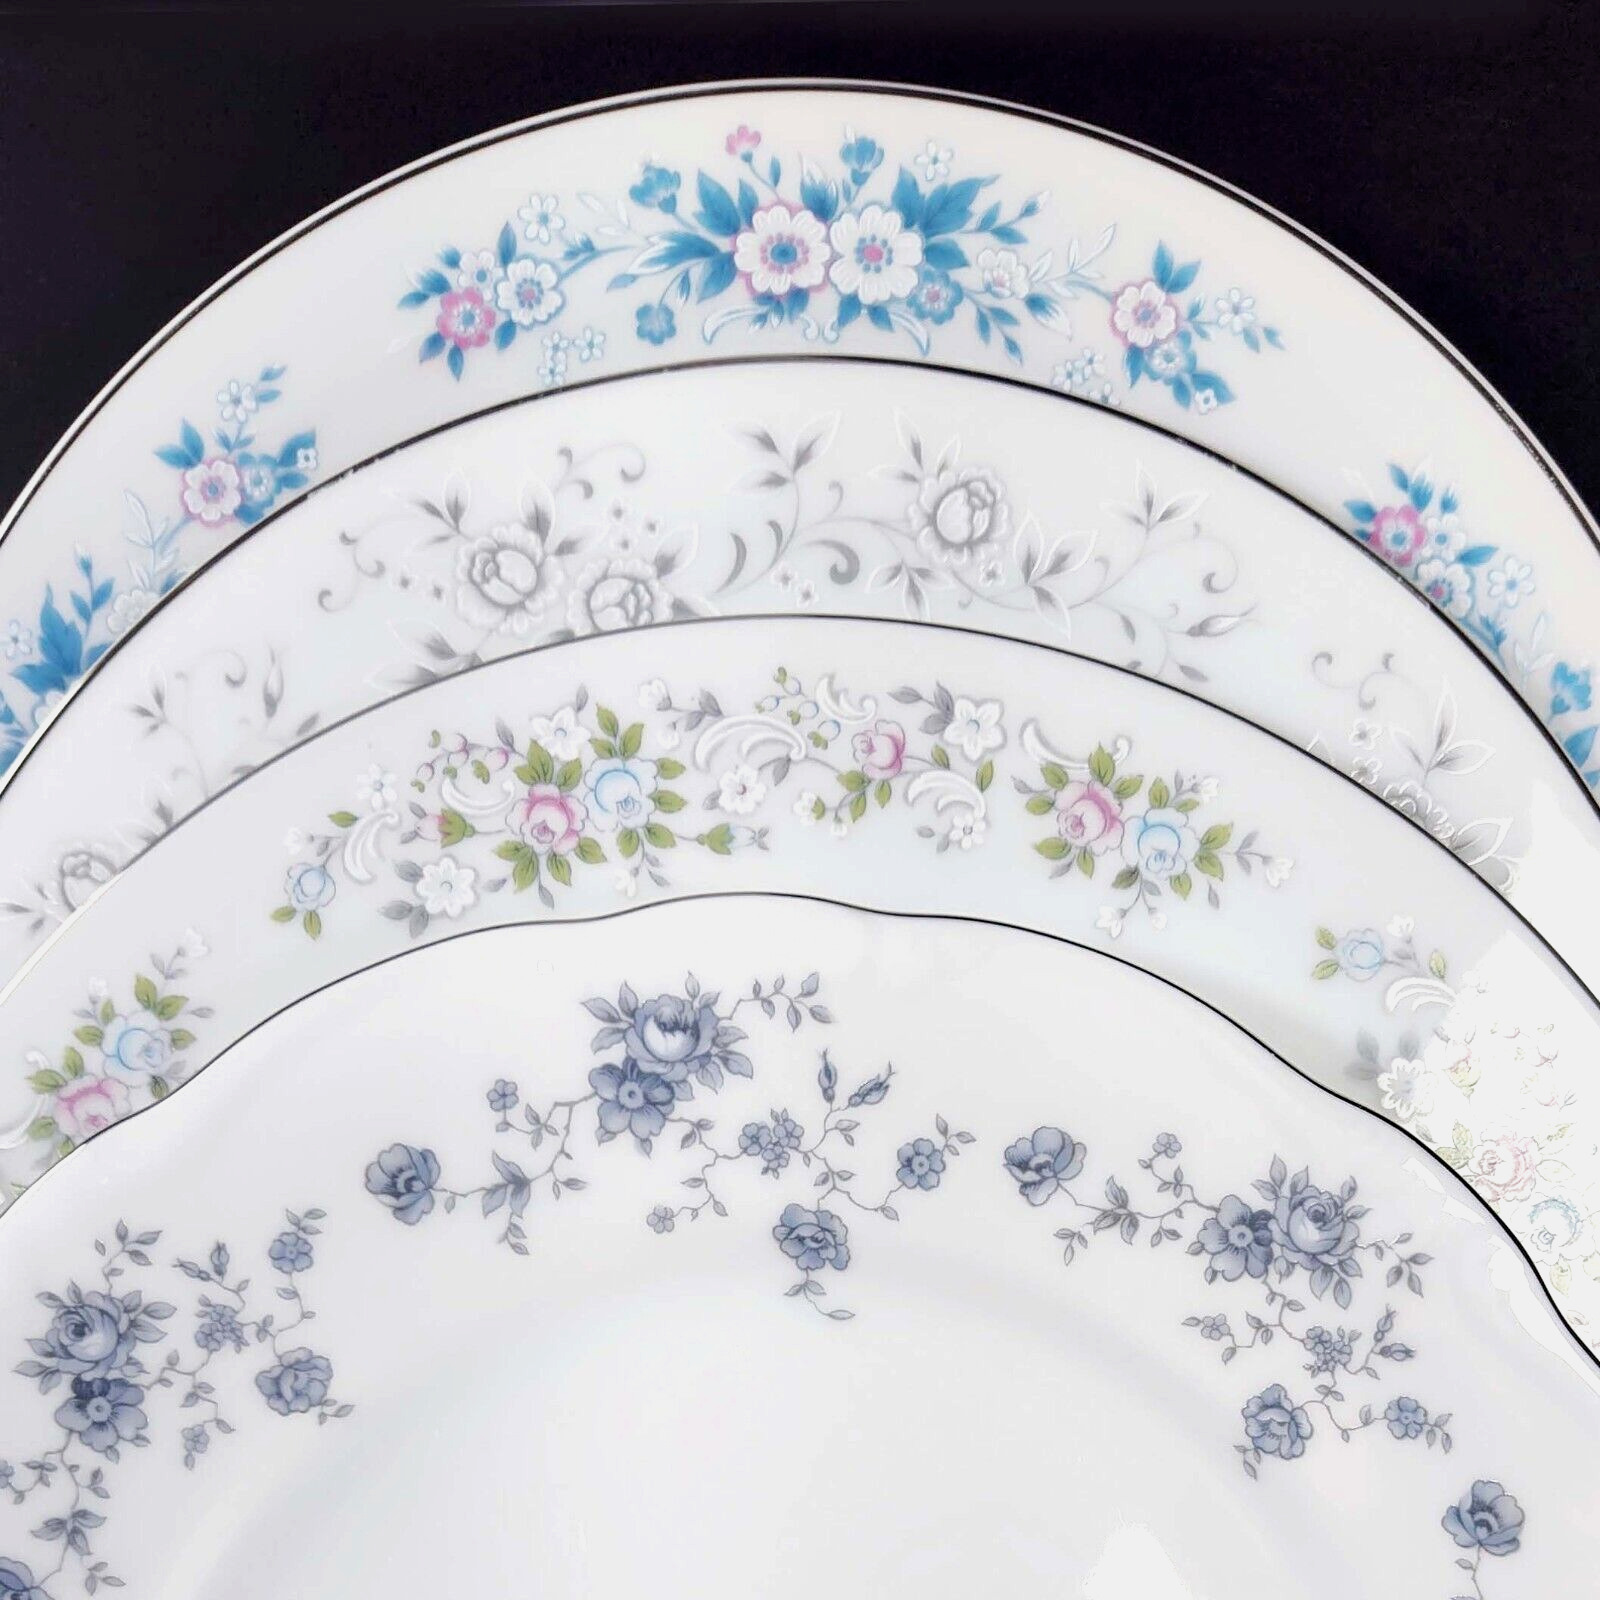 Mismatched China Dinner Plates Vintage Floral Plates Mix and Match Set of 4